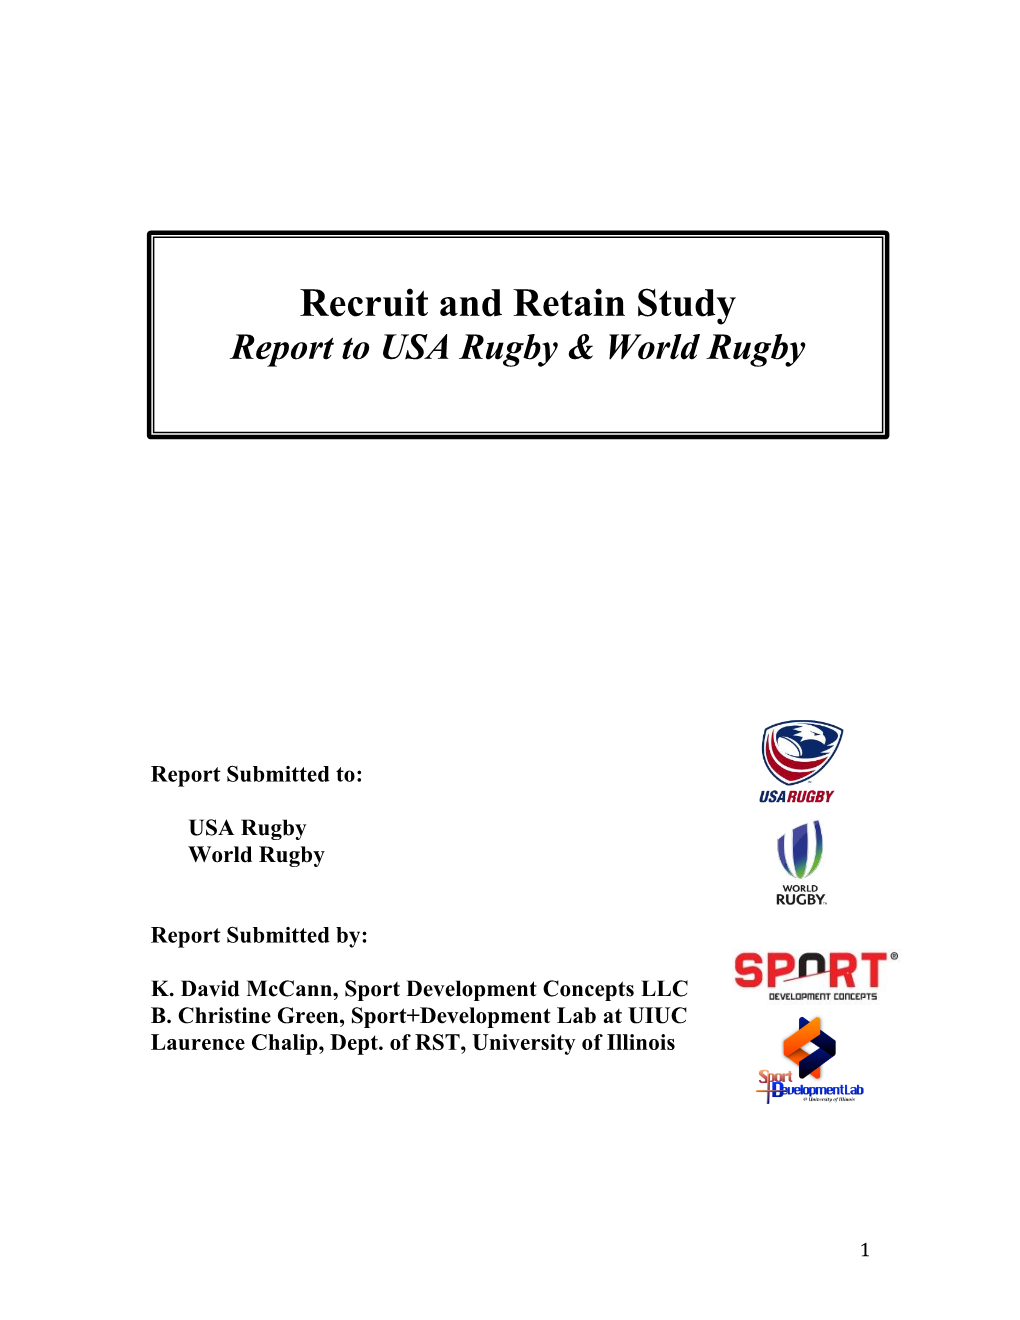 Recruit and Retain Study Report to USA Rugby & World Rugby